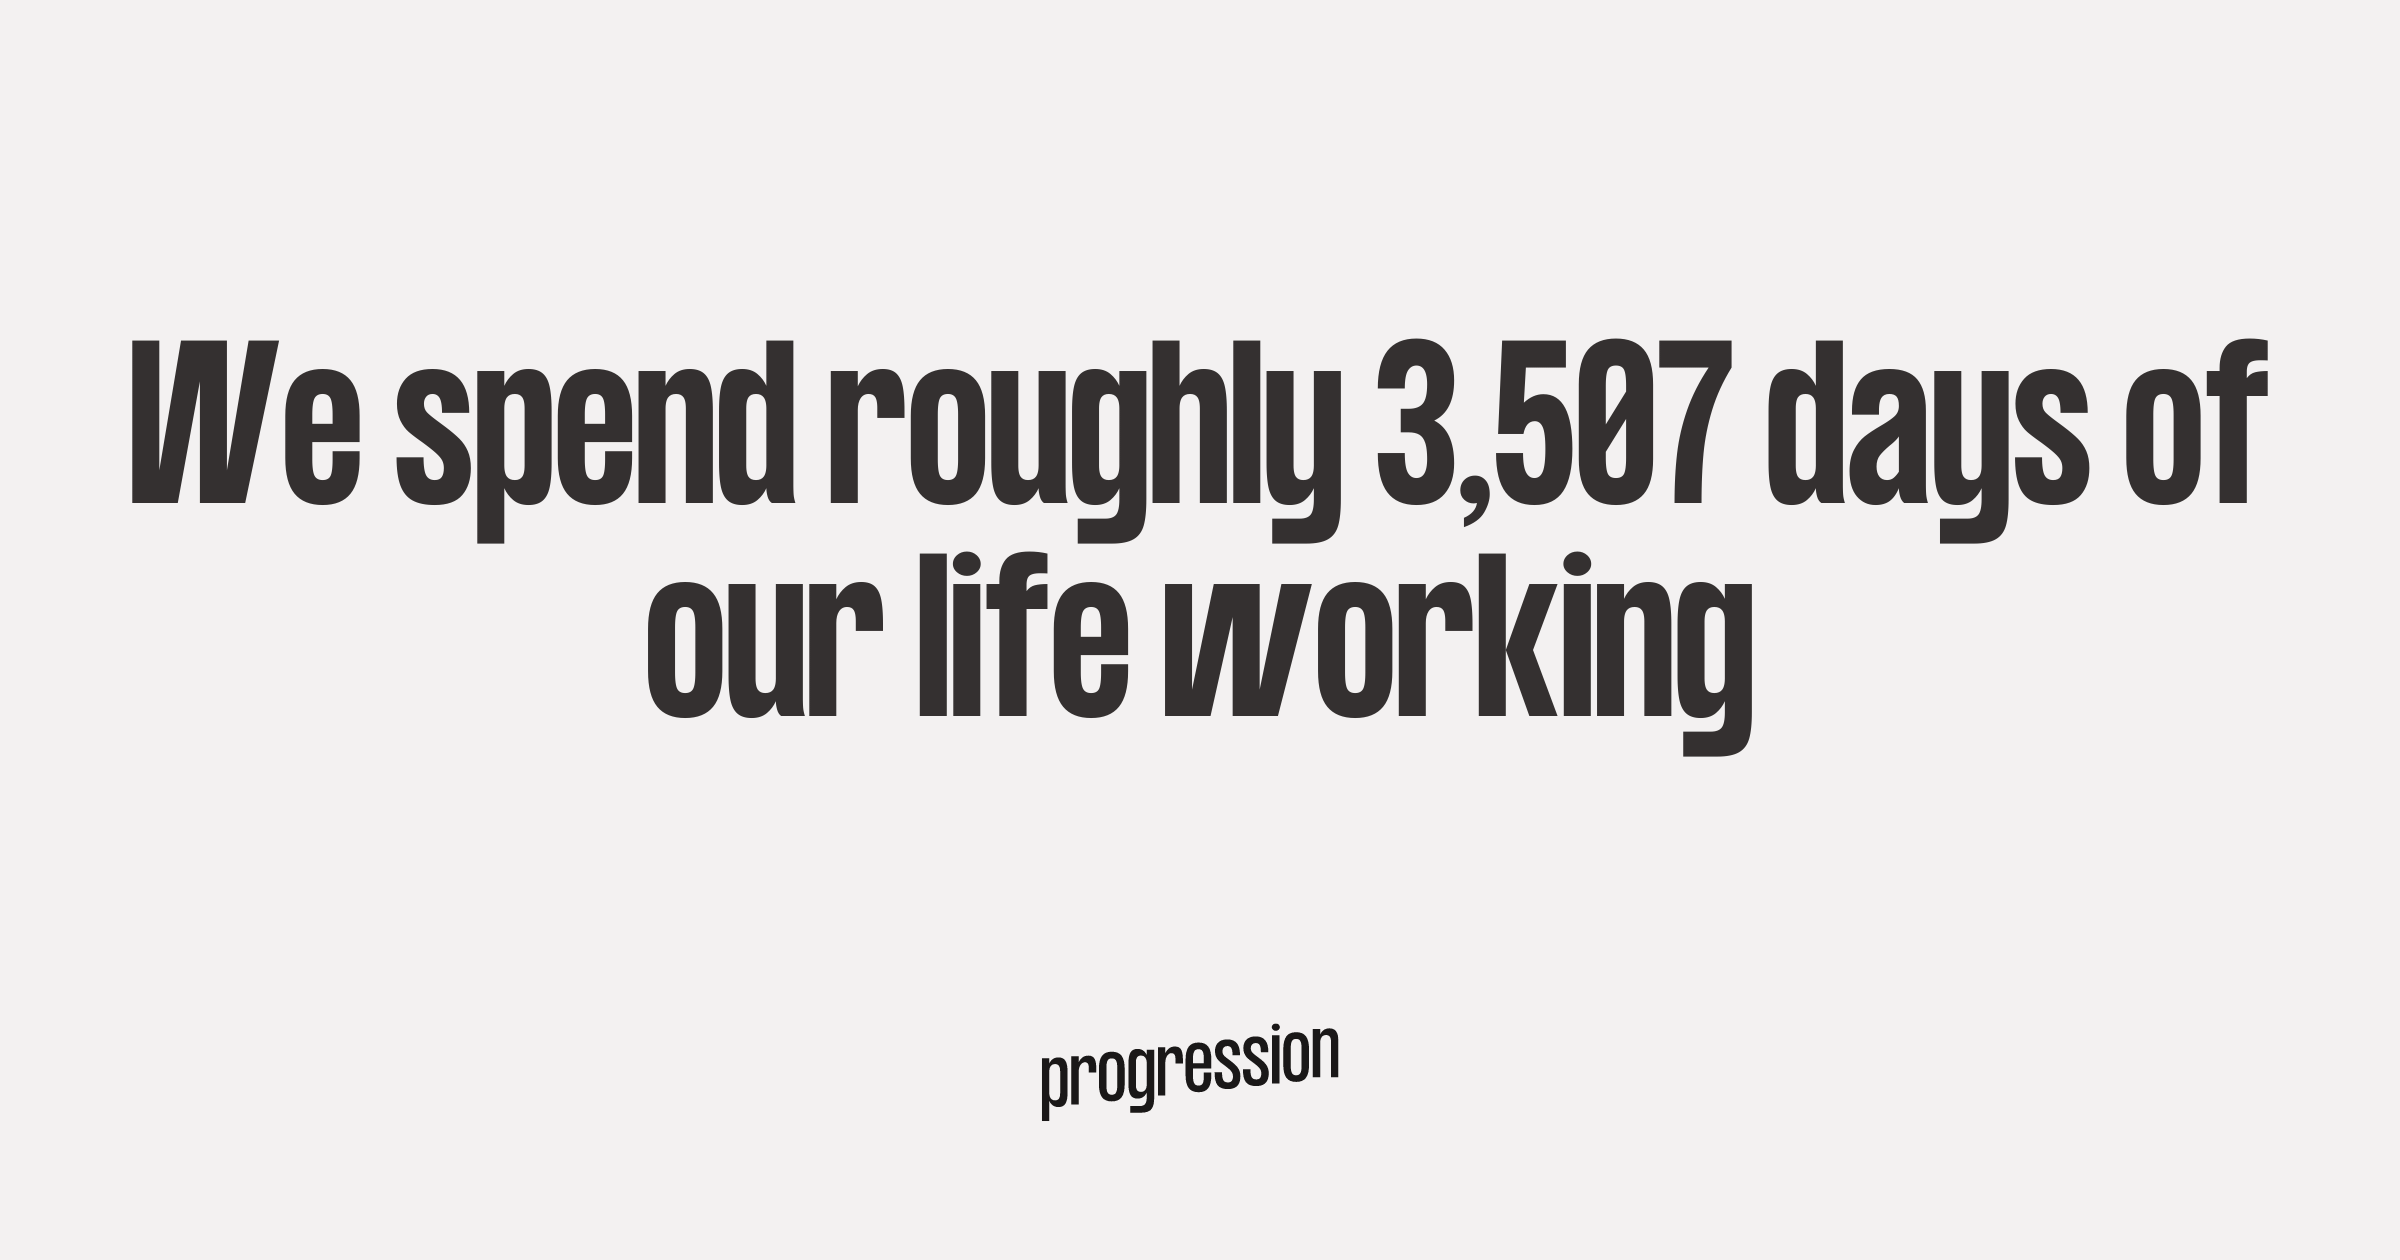 We spend roughly 3,507 days of our life working